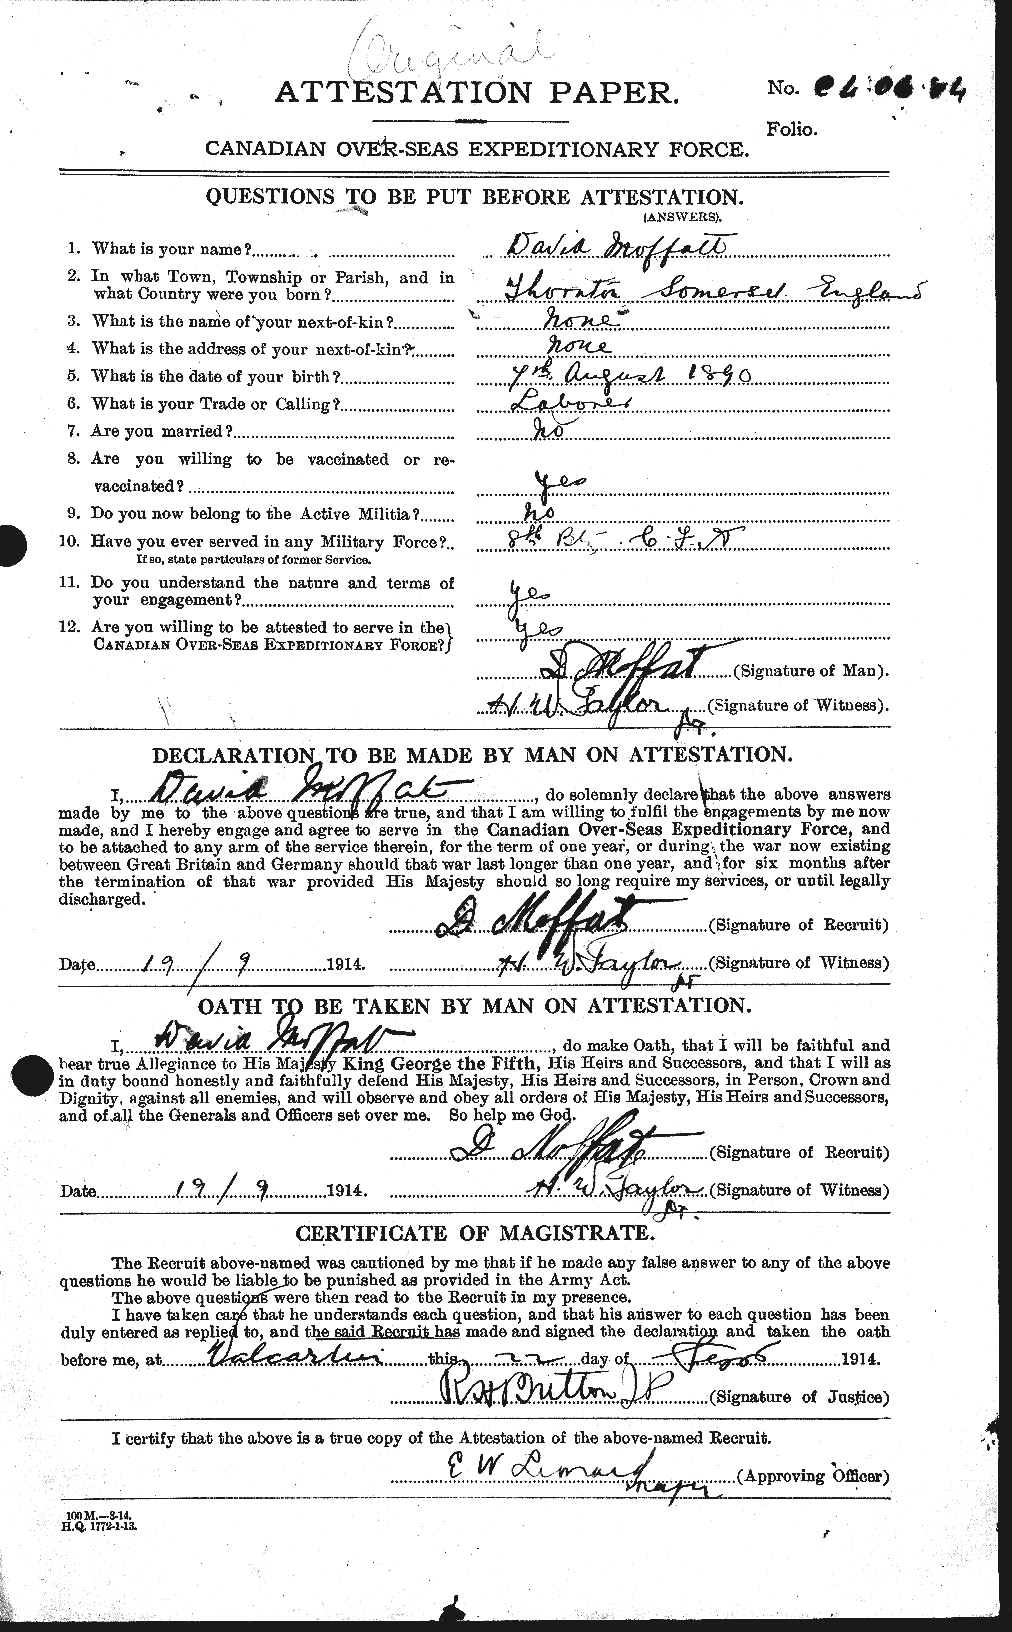 Personnel Records of the First World War - CEF 499117a